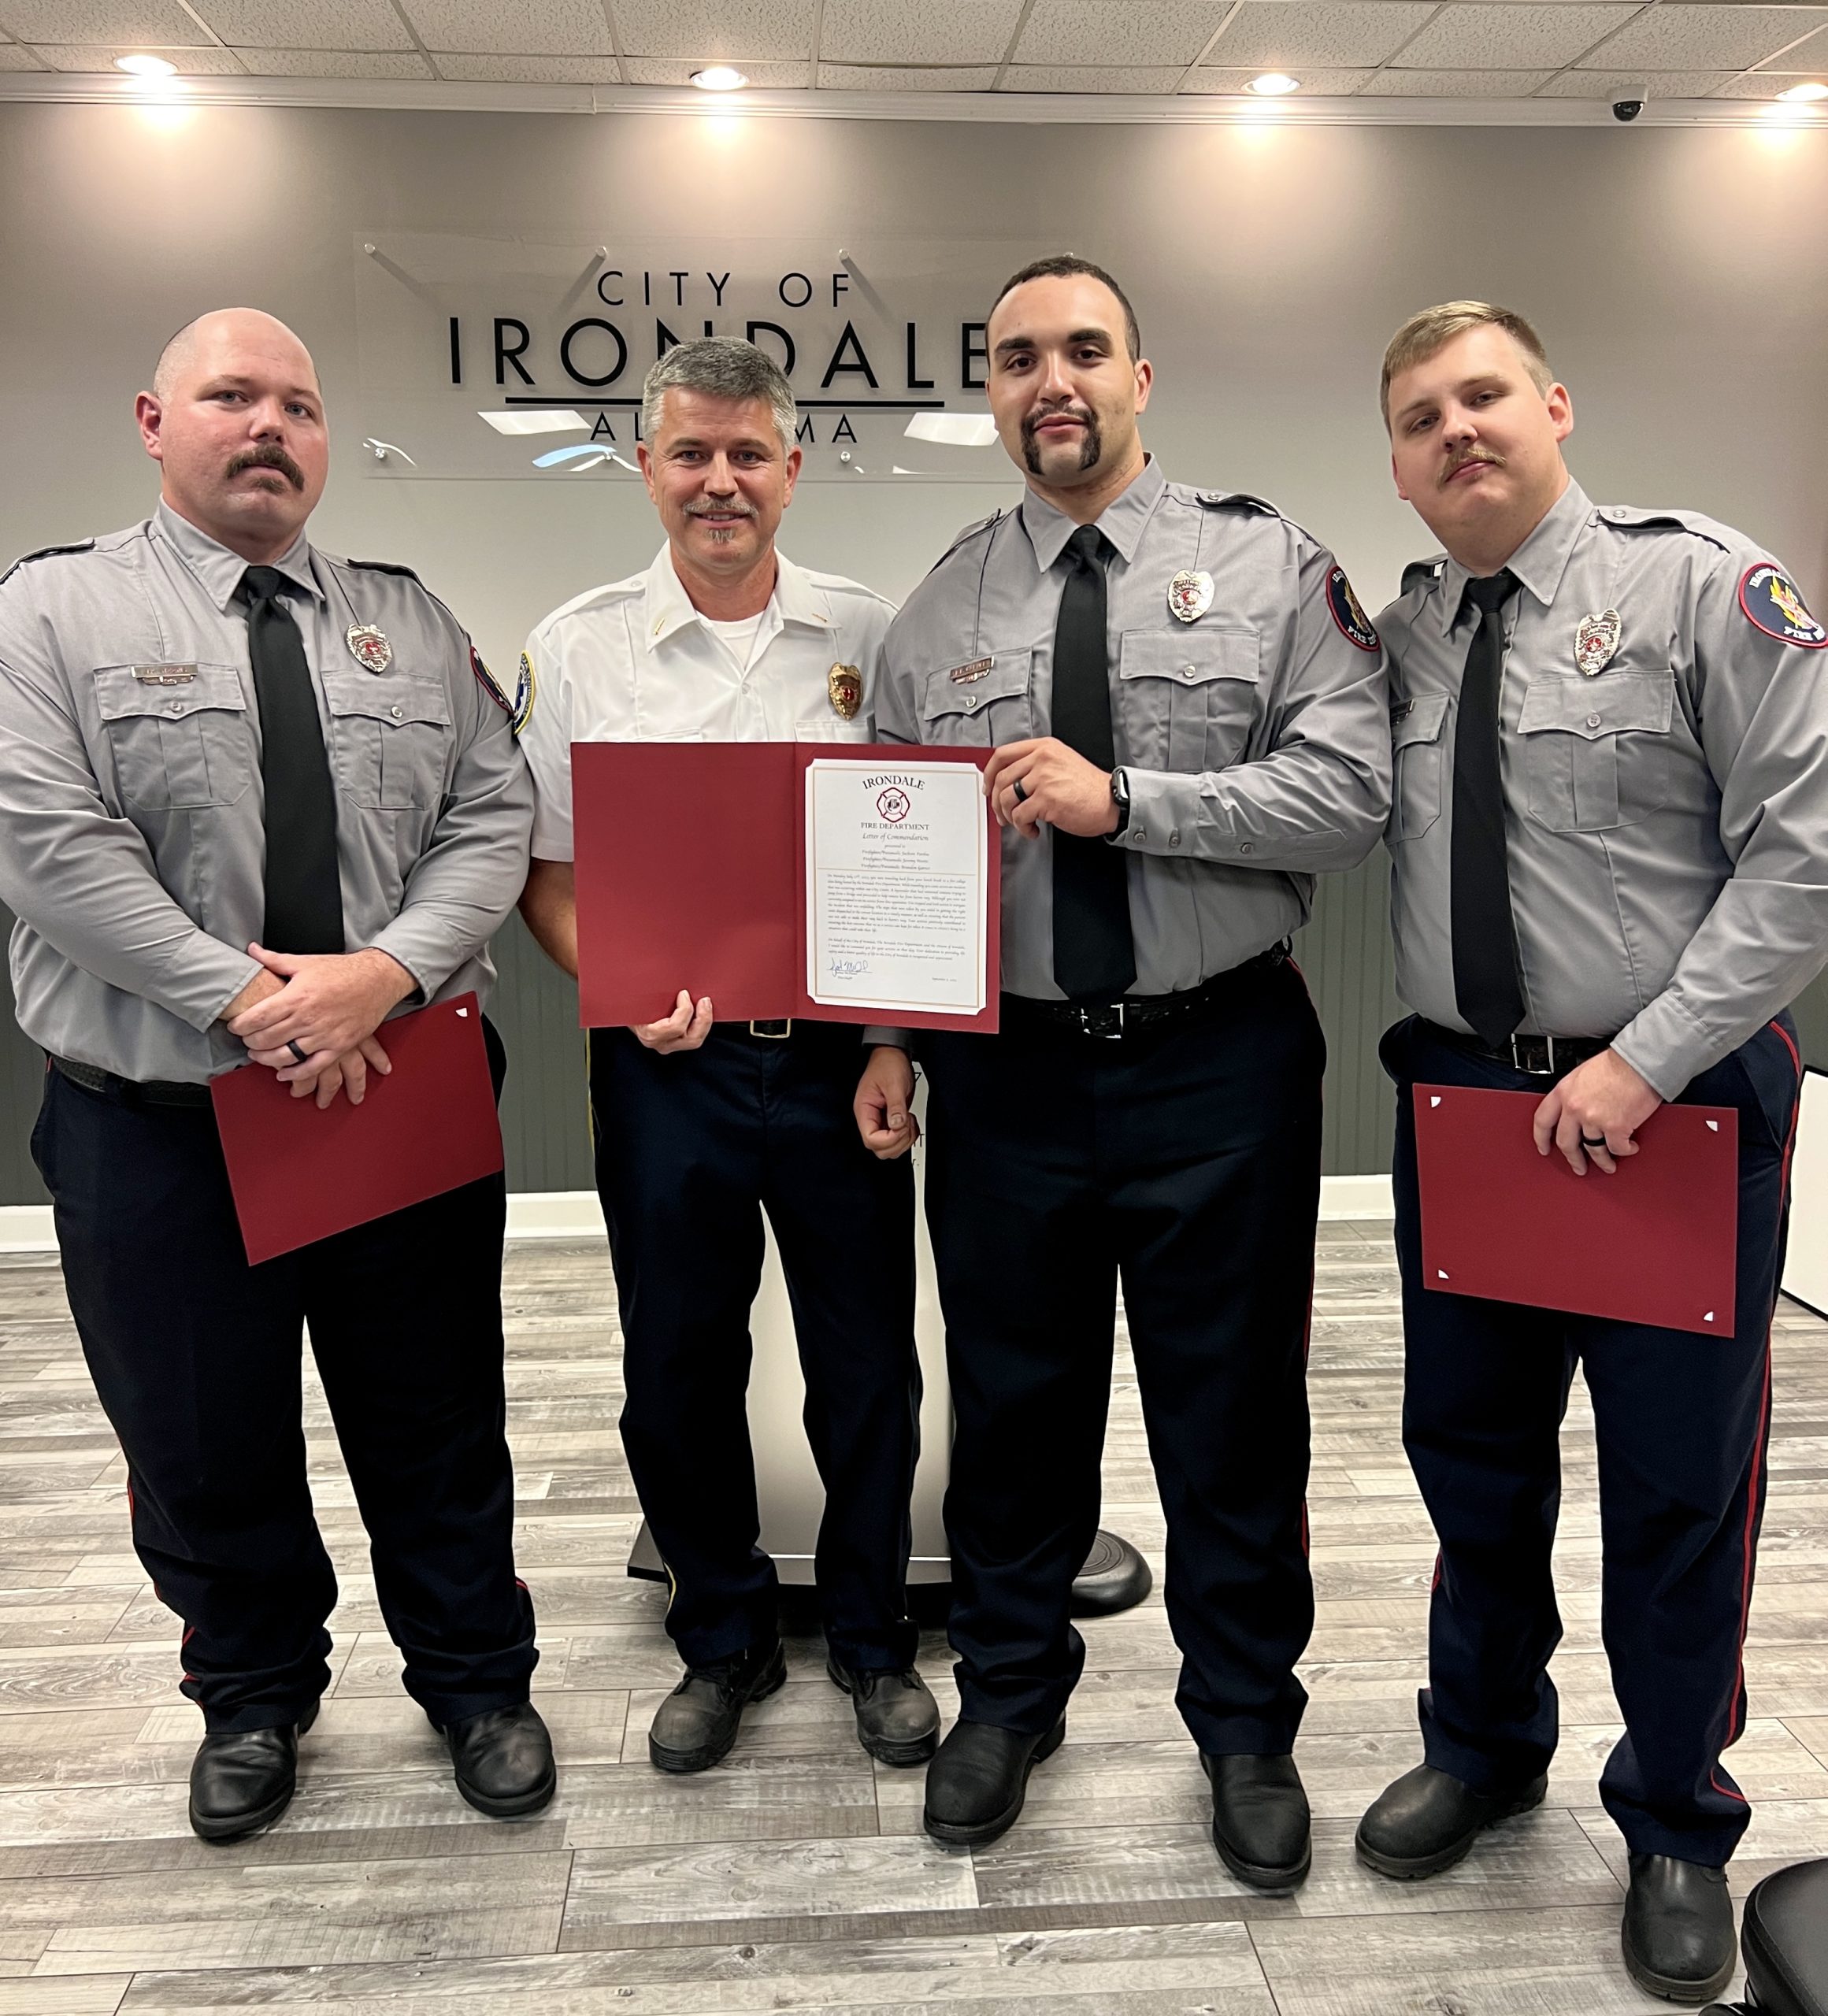 Irondale recognizes efforts of local citizens, first responders with awards